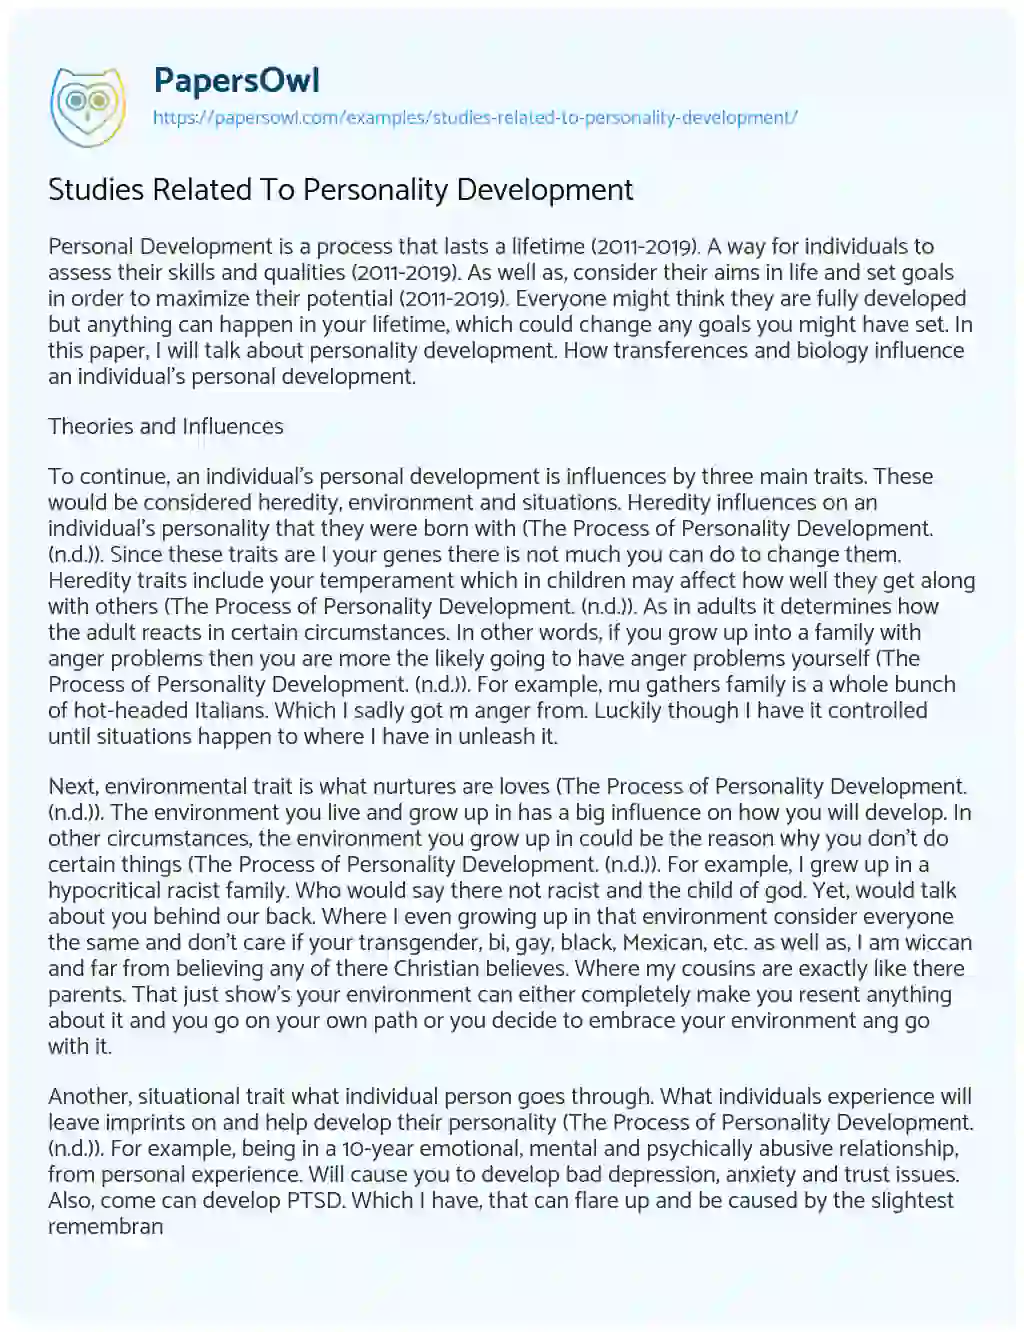 Essay on Studies Related to Personality Development